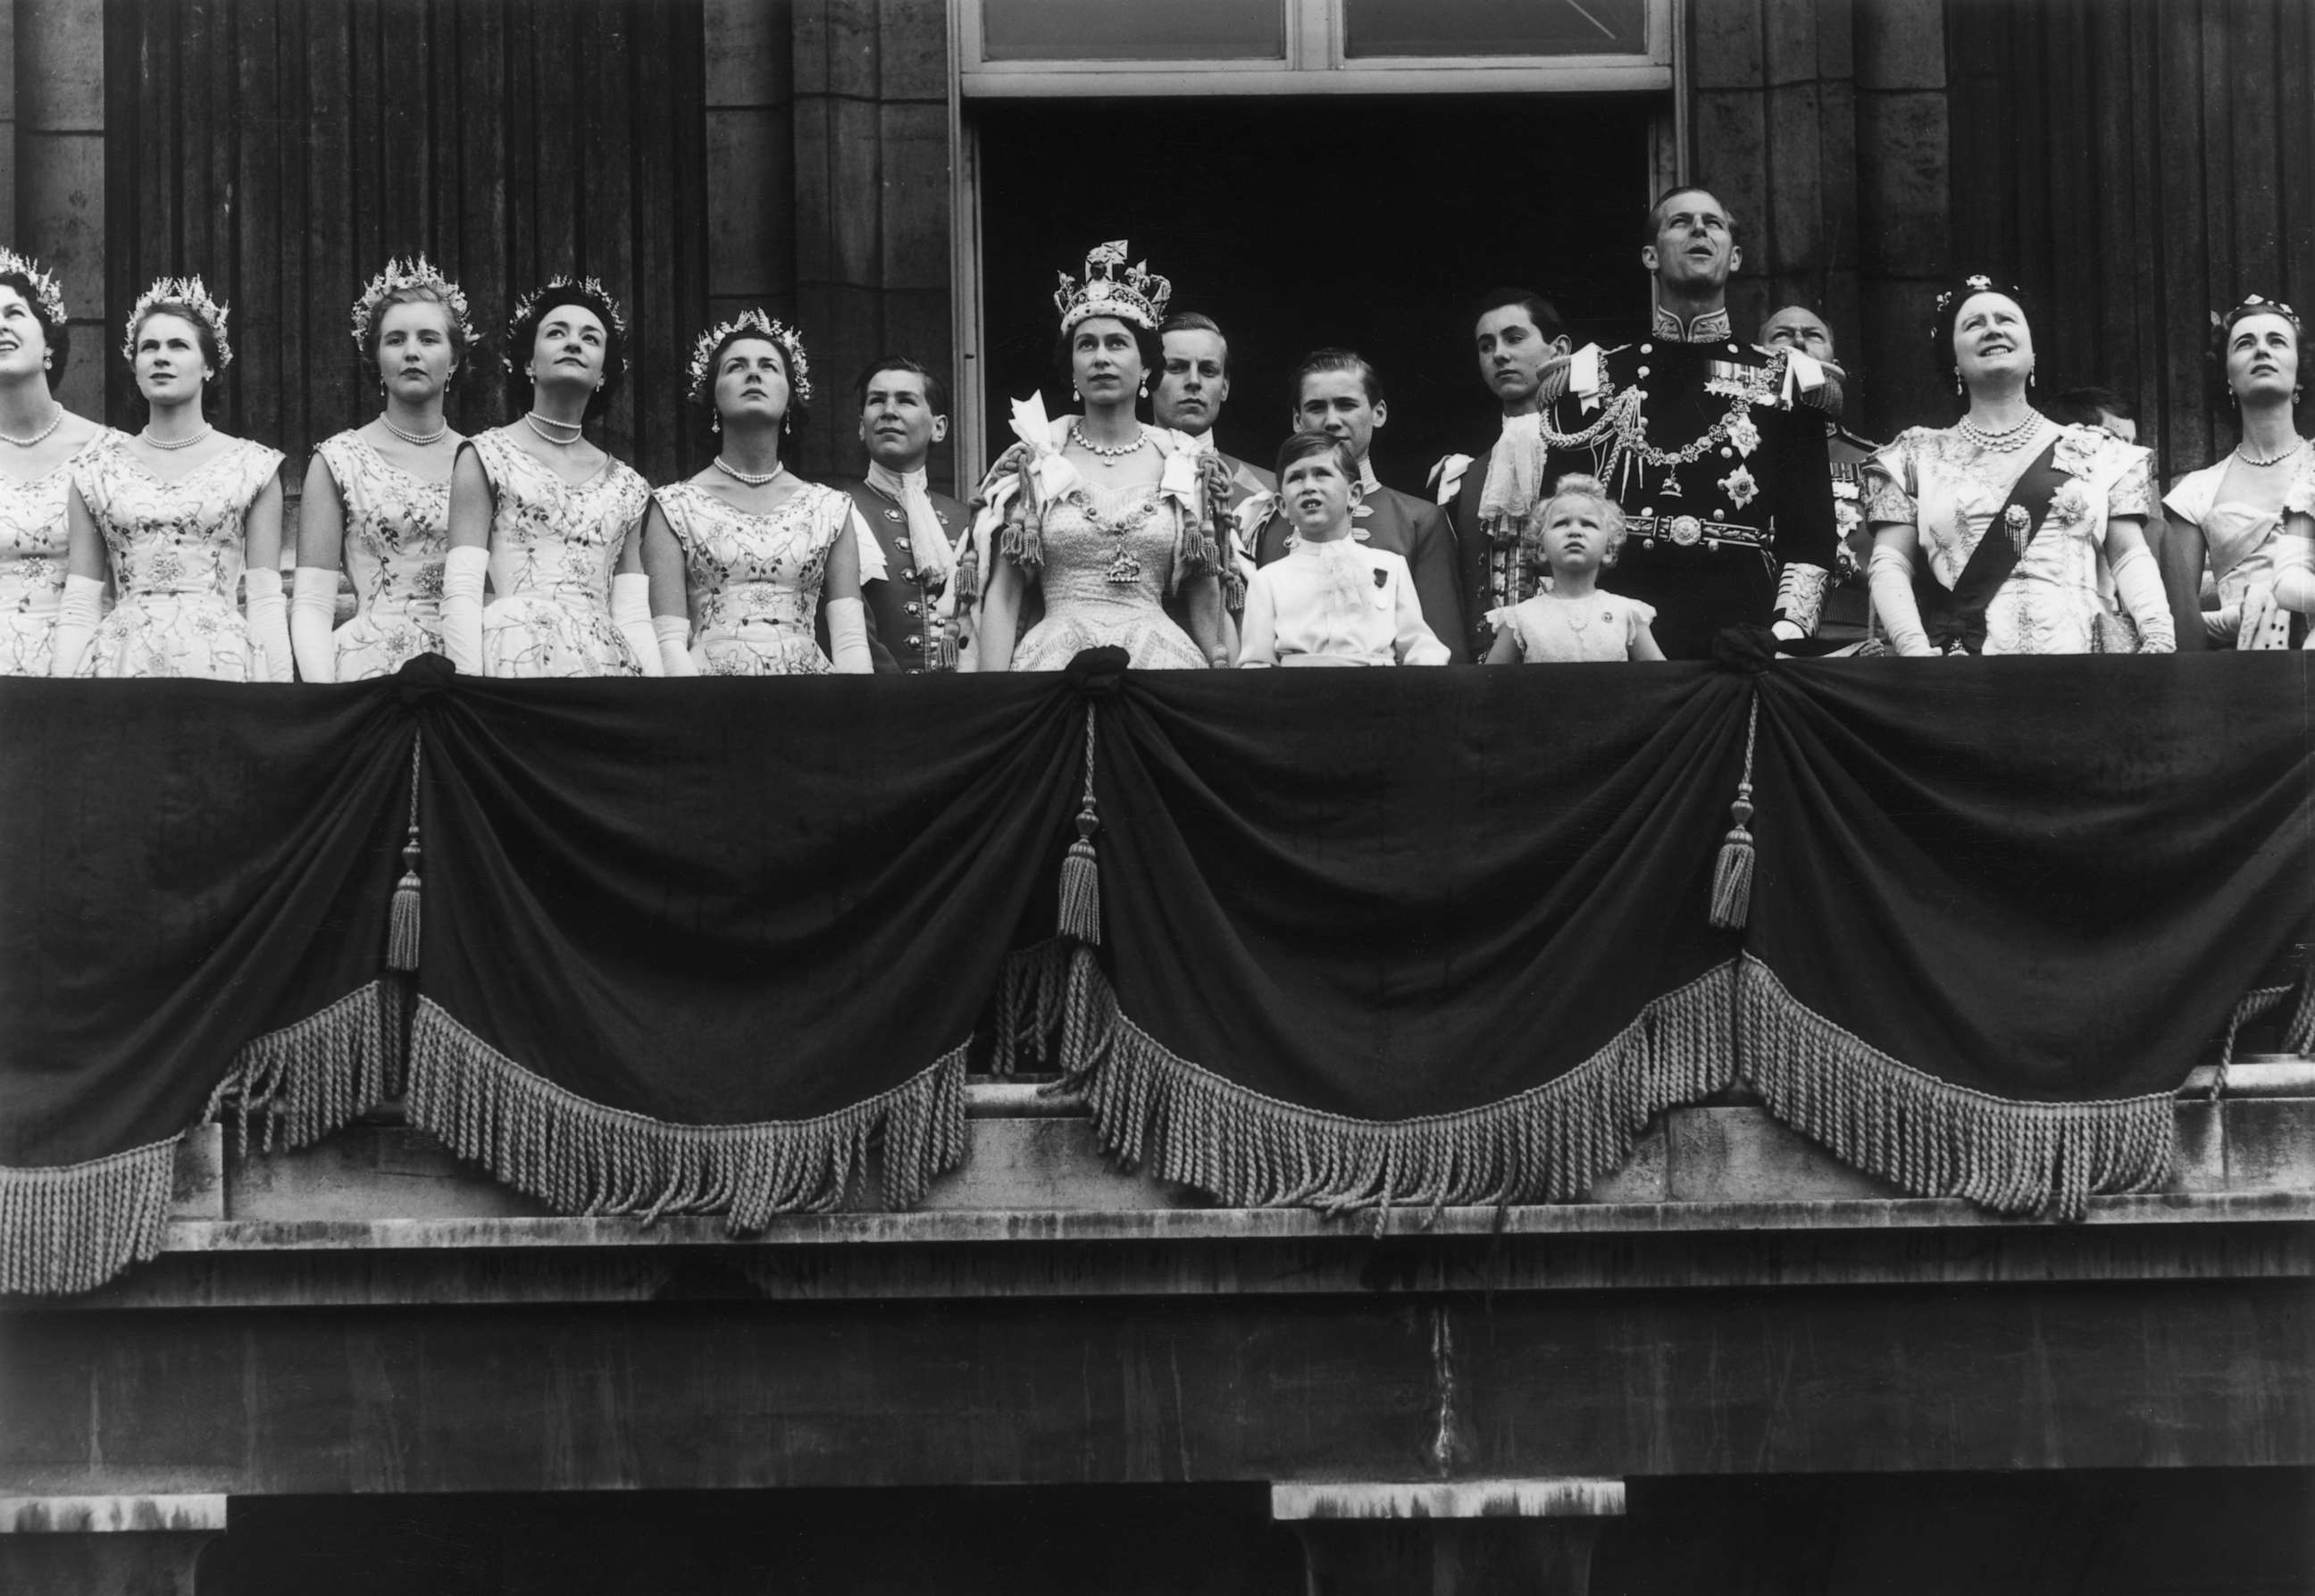 PHOTO: The newly crowned Queen Elizabeth II waves to the crowd from the balcony at Buckingham Palace following her Coronation, June 2, 1953, in London.